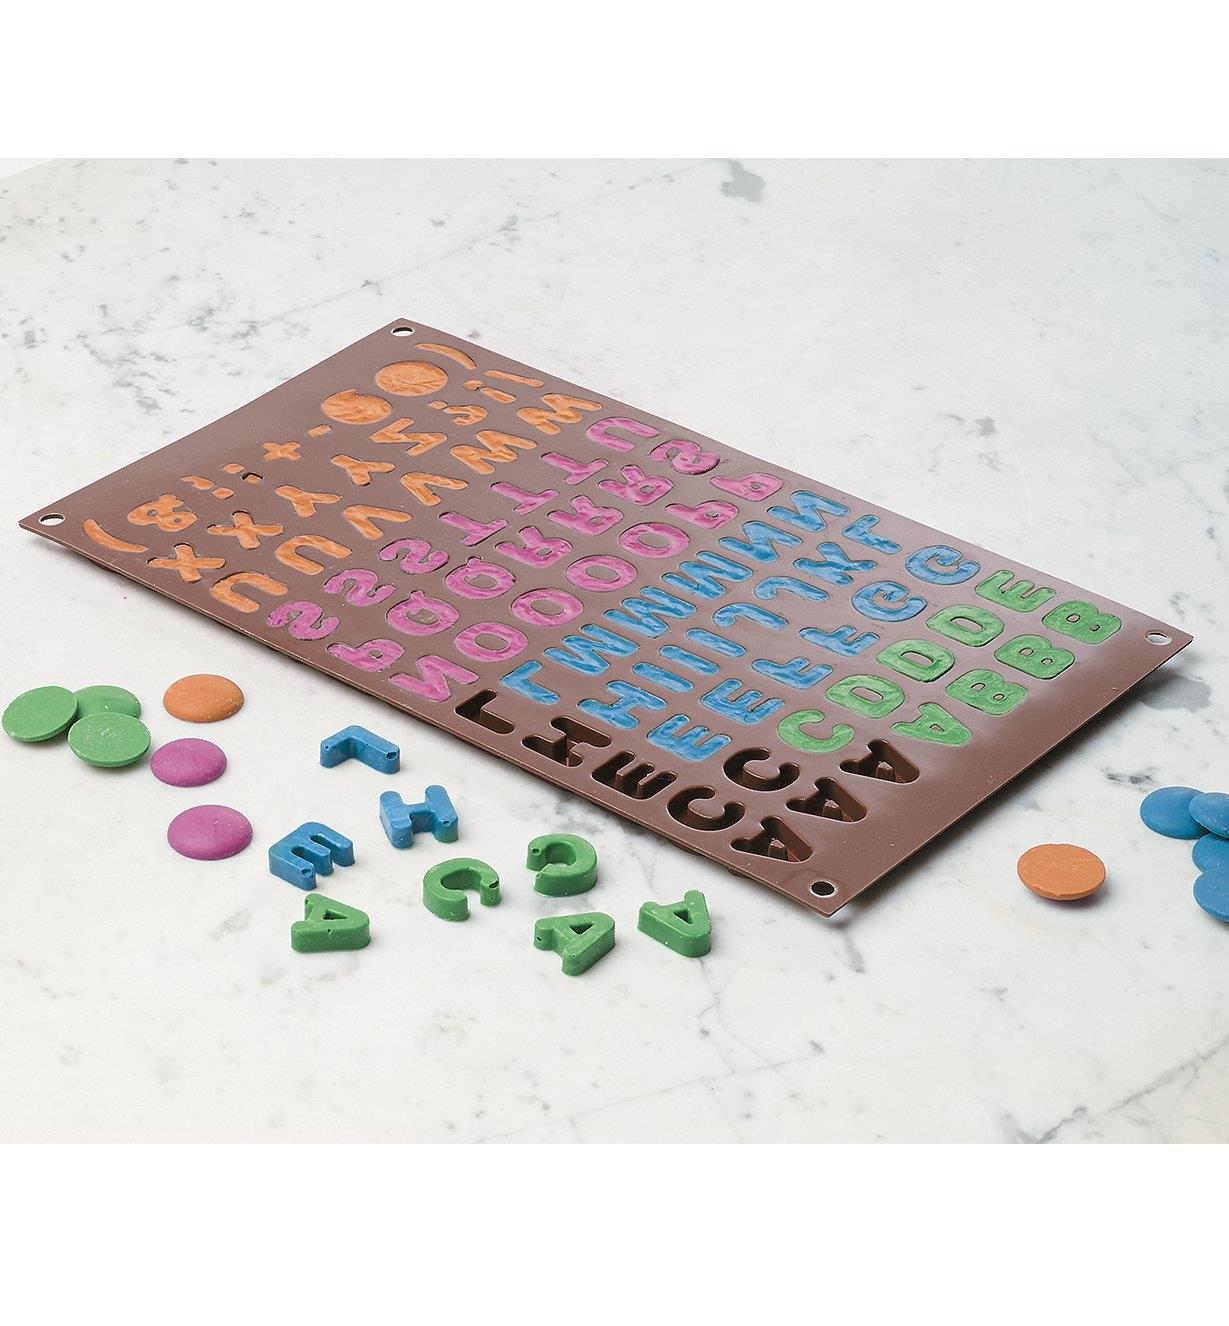 Chocolate Mold filled with various colors of chocolate, with some chocolate letters removed